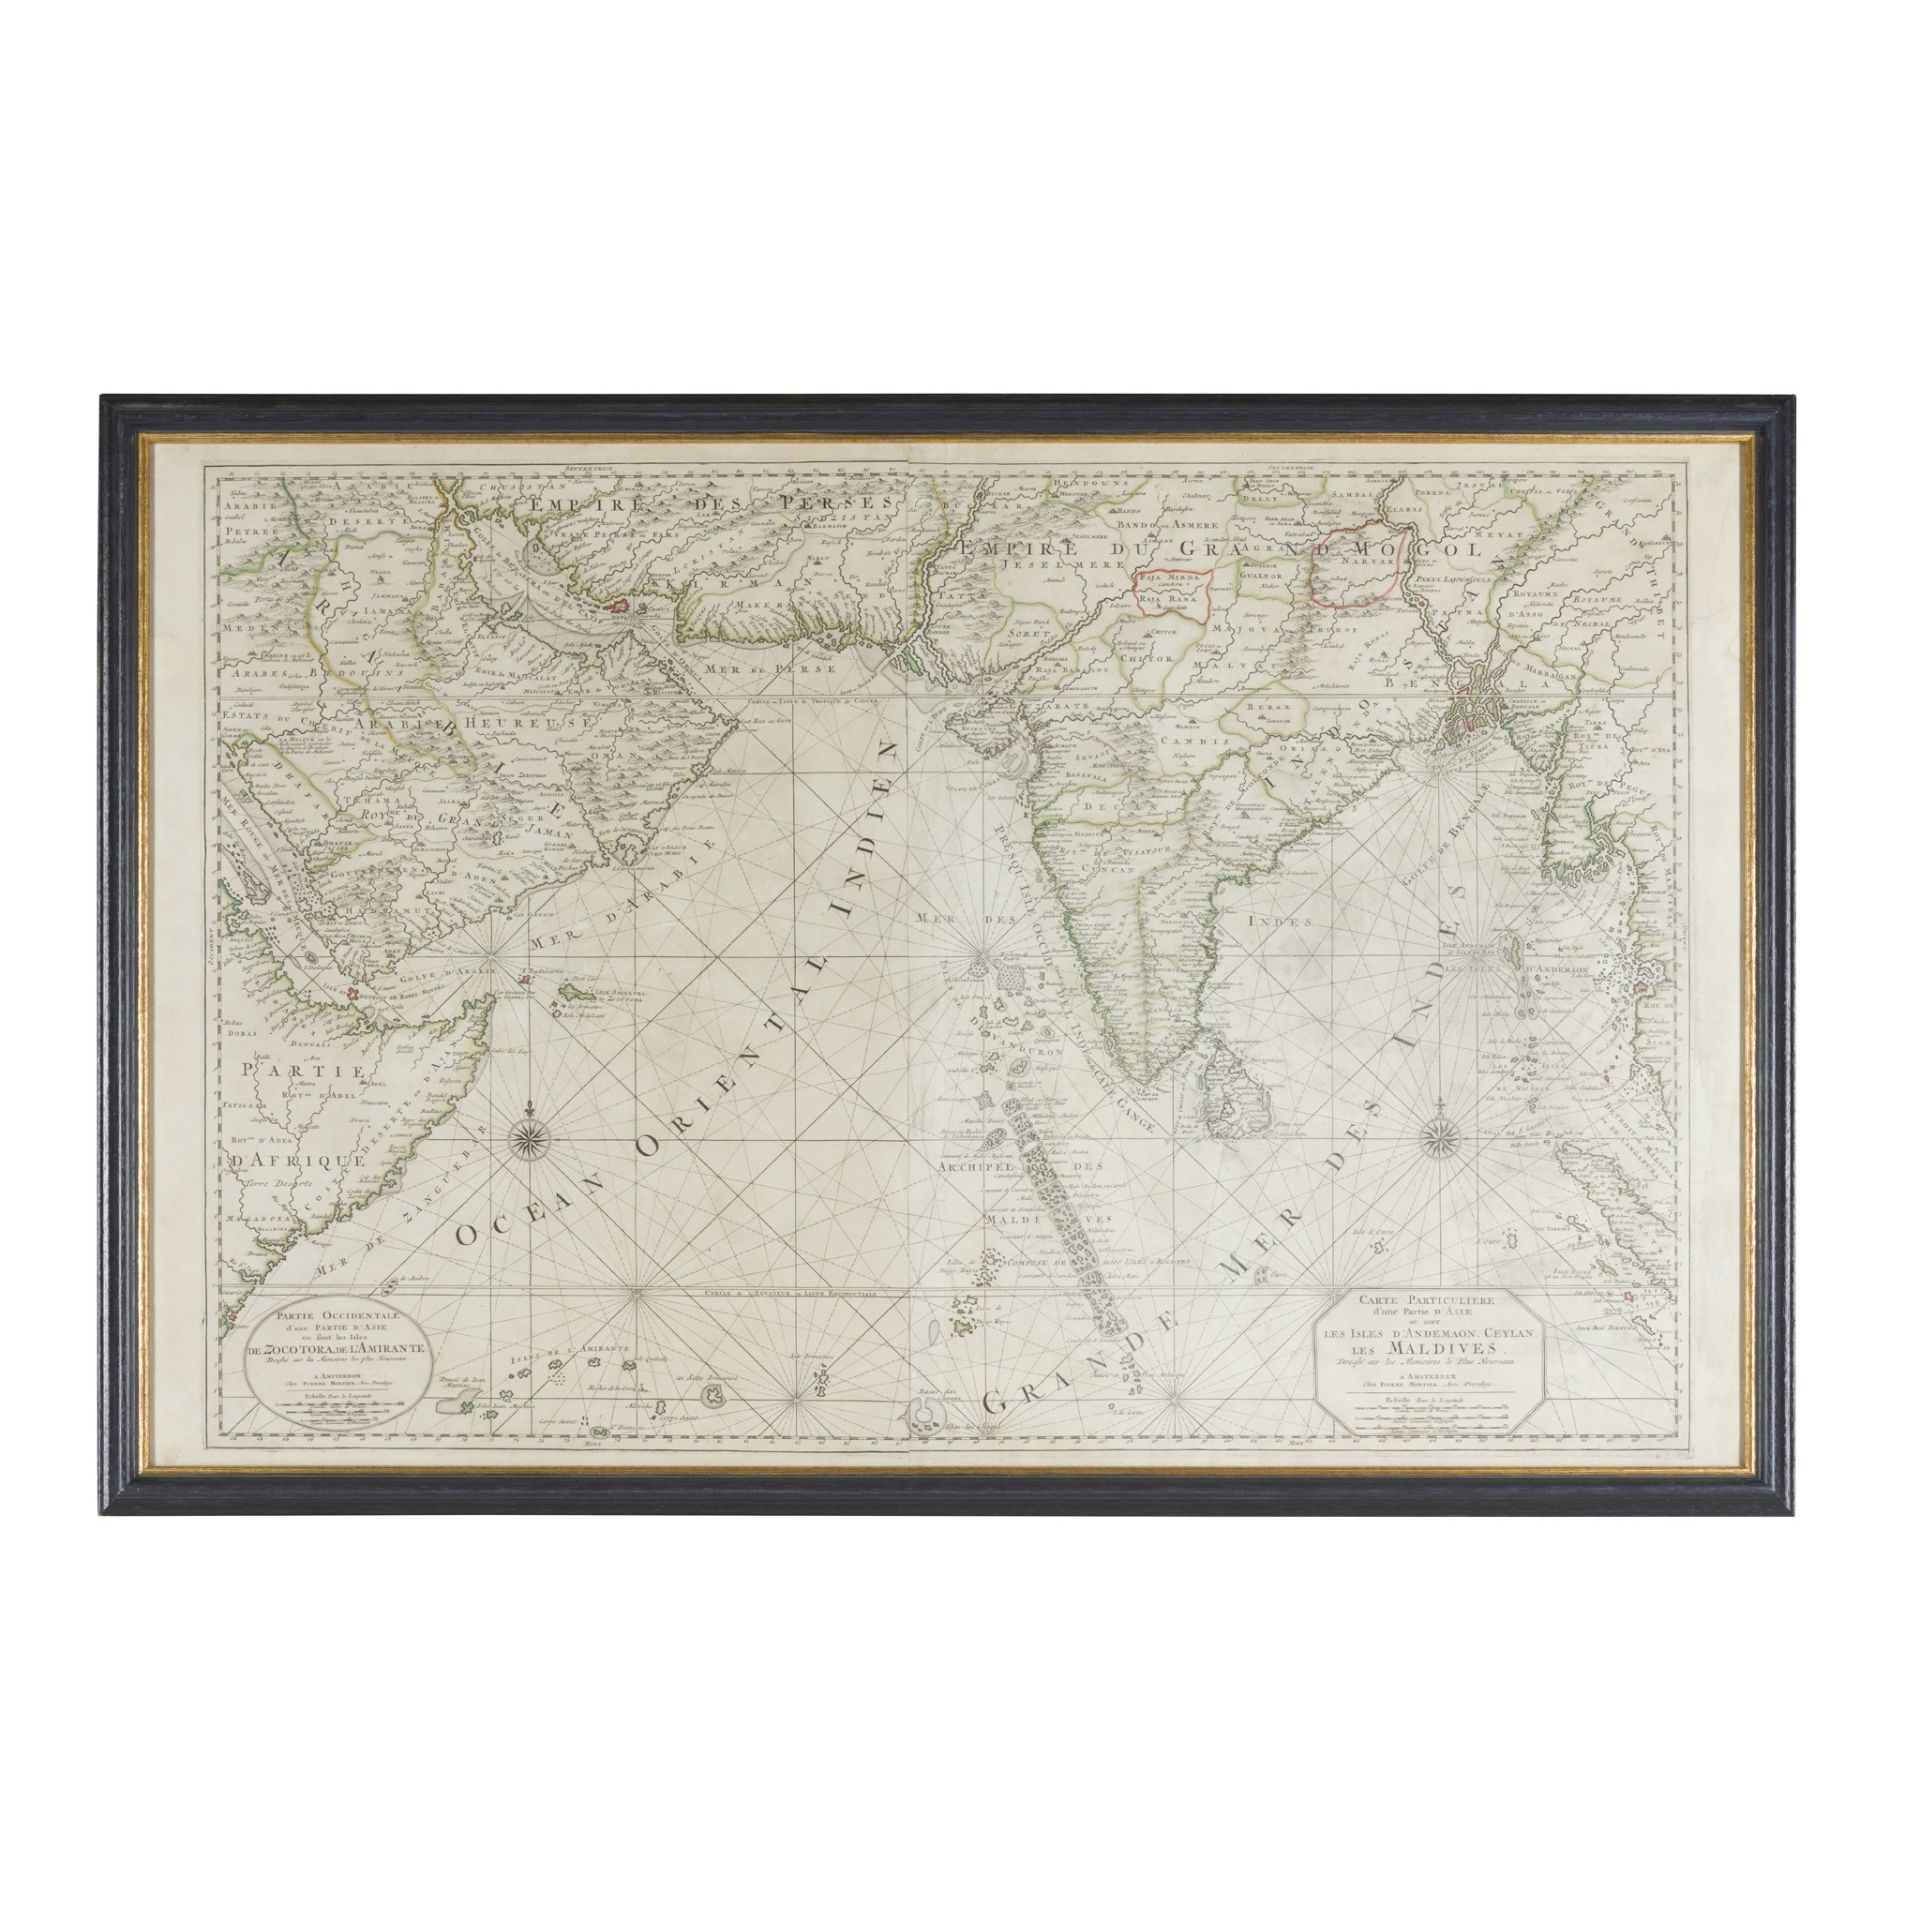 Mortier, Pierre [Chart of the Indian Ocean on two sheets], Amsterdam, c.1700